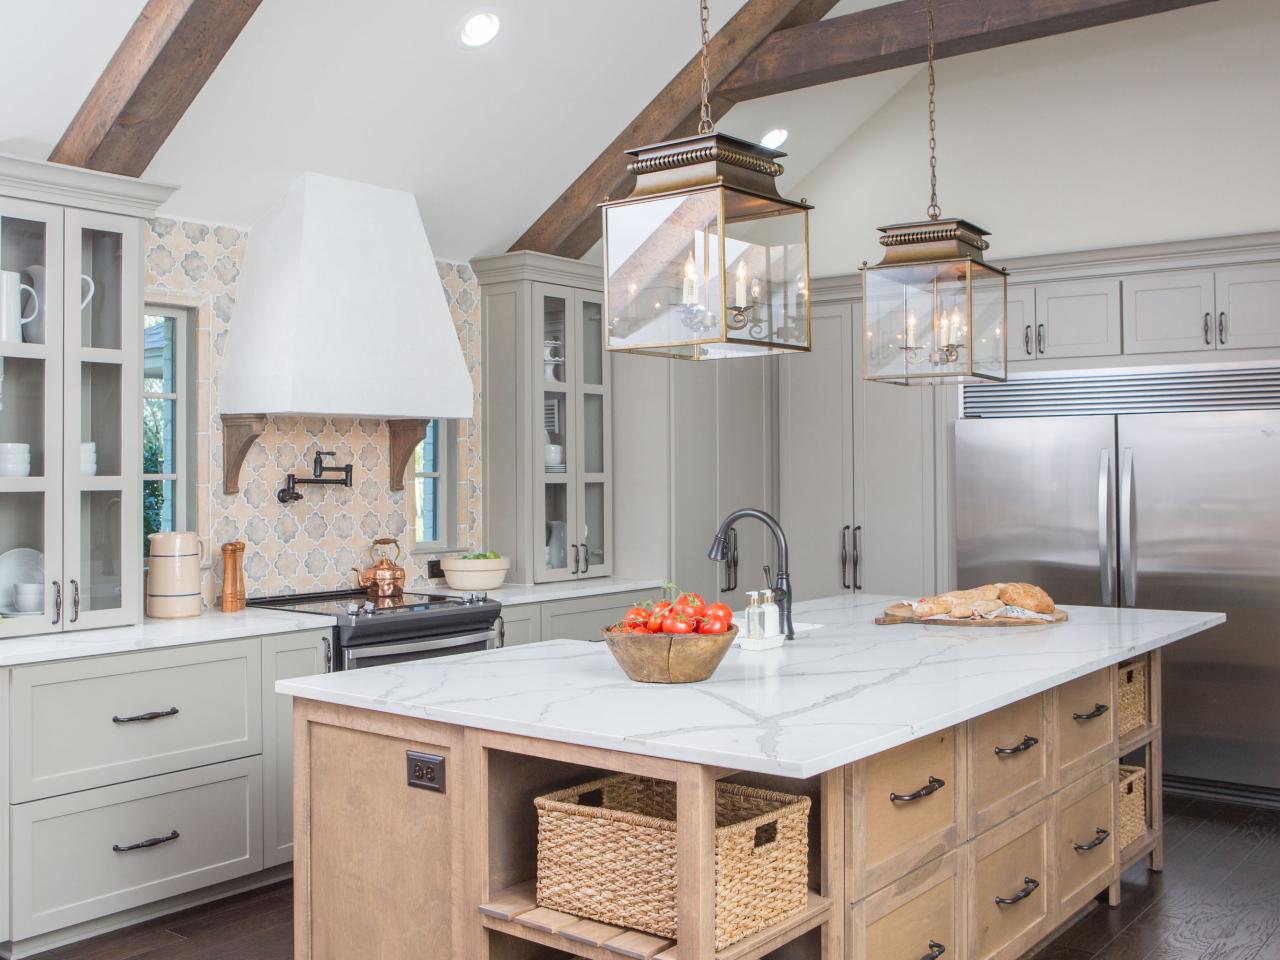 Farmhouse kitchen with wood beams and stylish rustic furnishings.